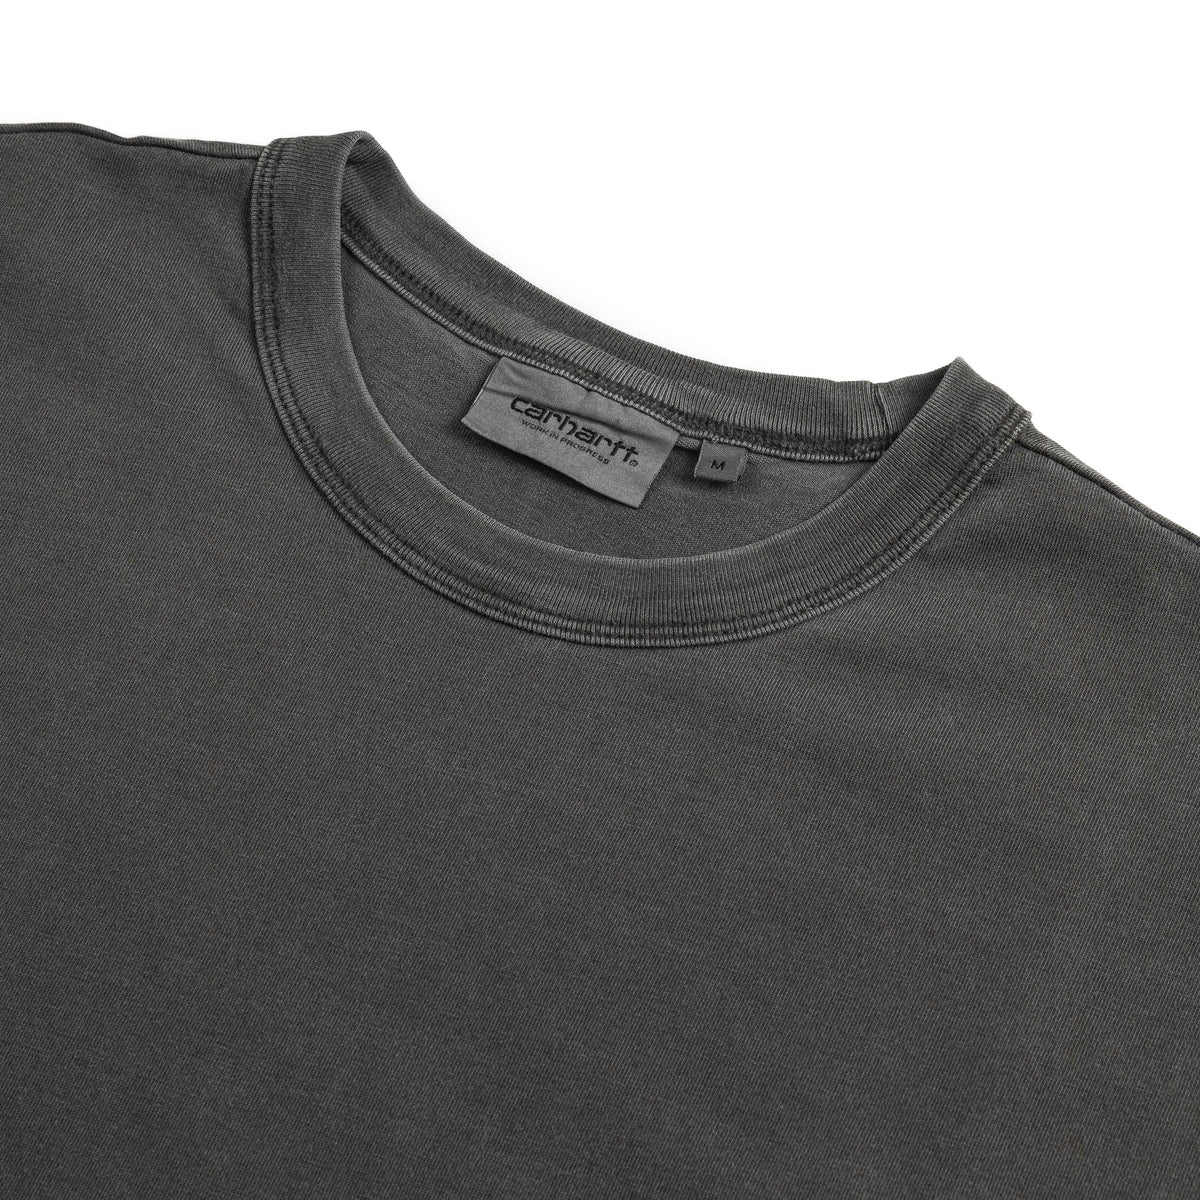 Carhartt WIP Taos T-Shirt – buy now at Asphaltgold Online Store!